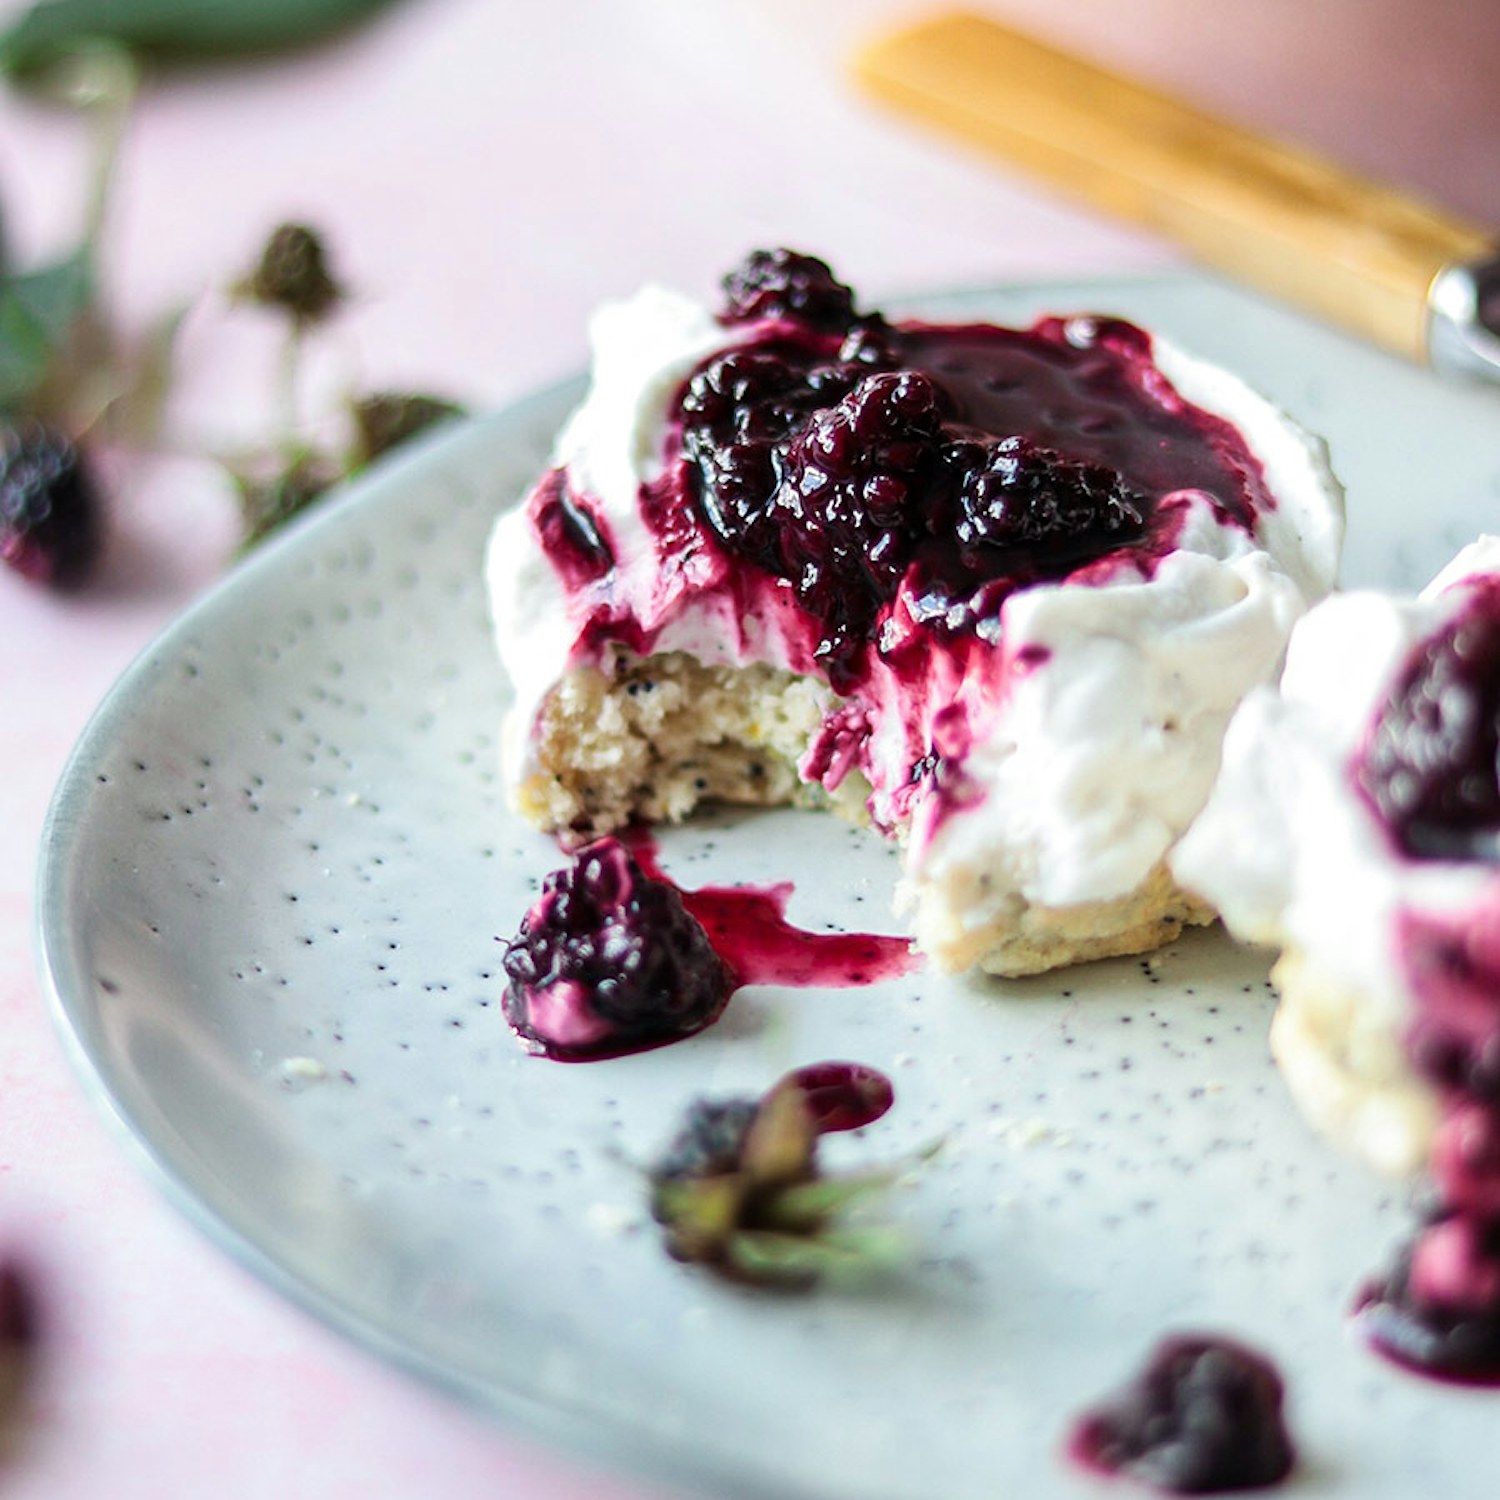 Lemon and Poppy Seed Scones with Wild Blackberry and Bay Compote